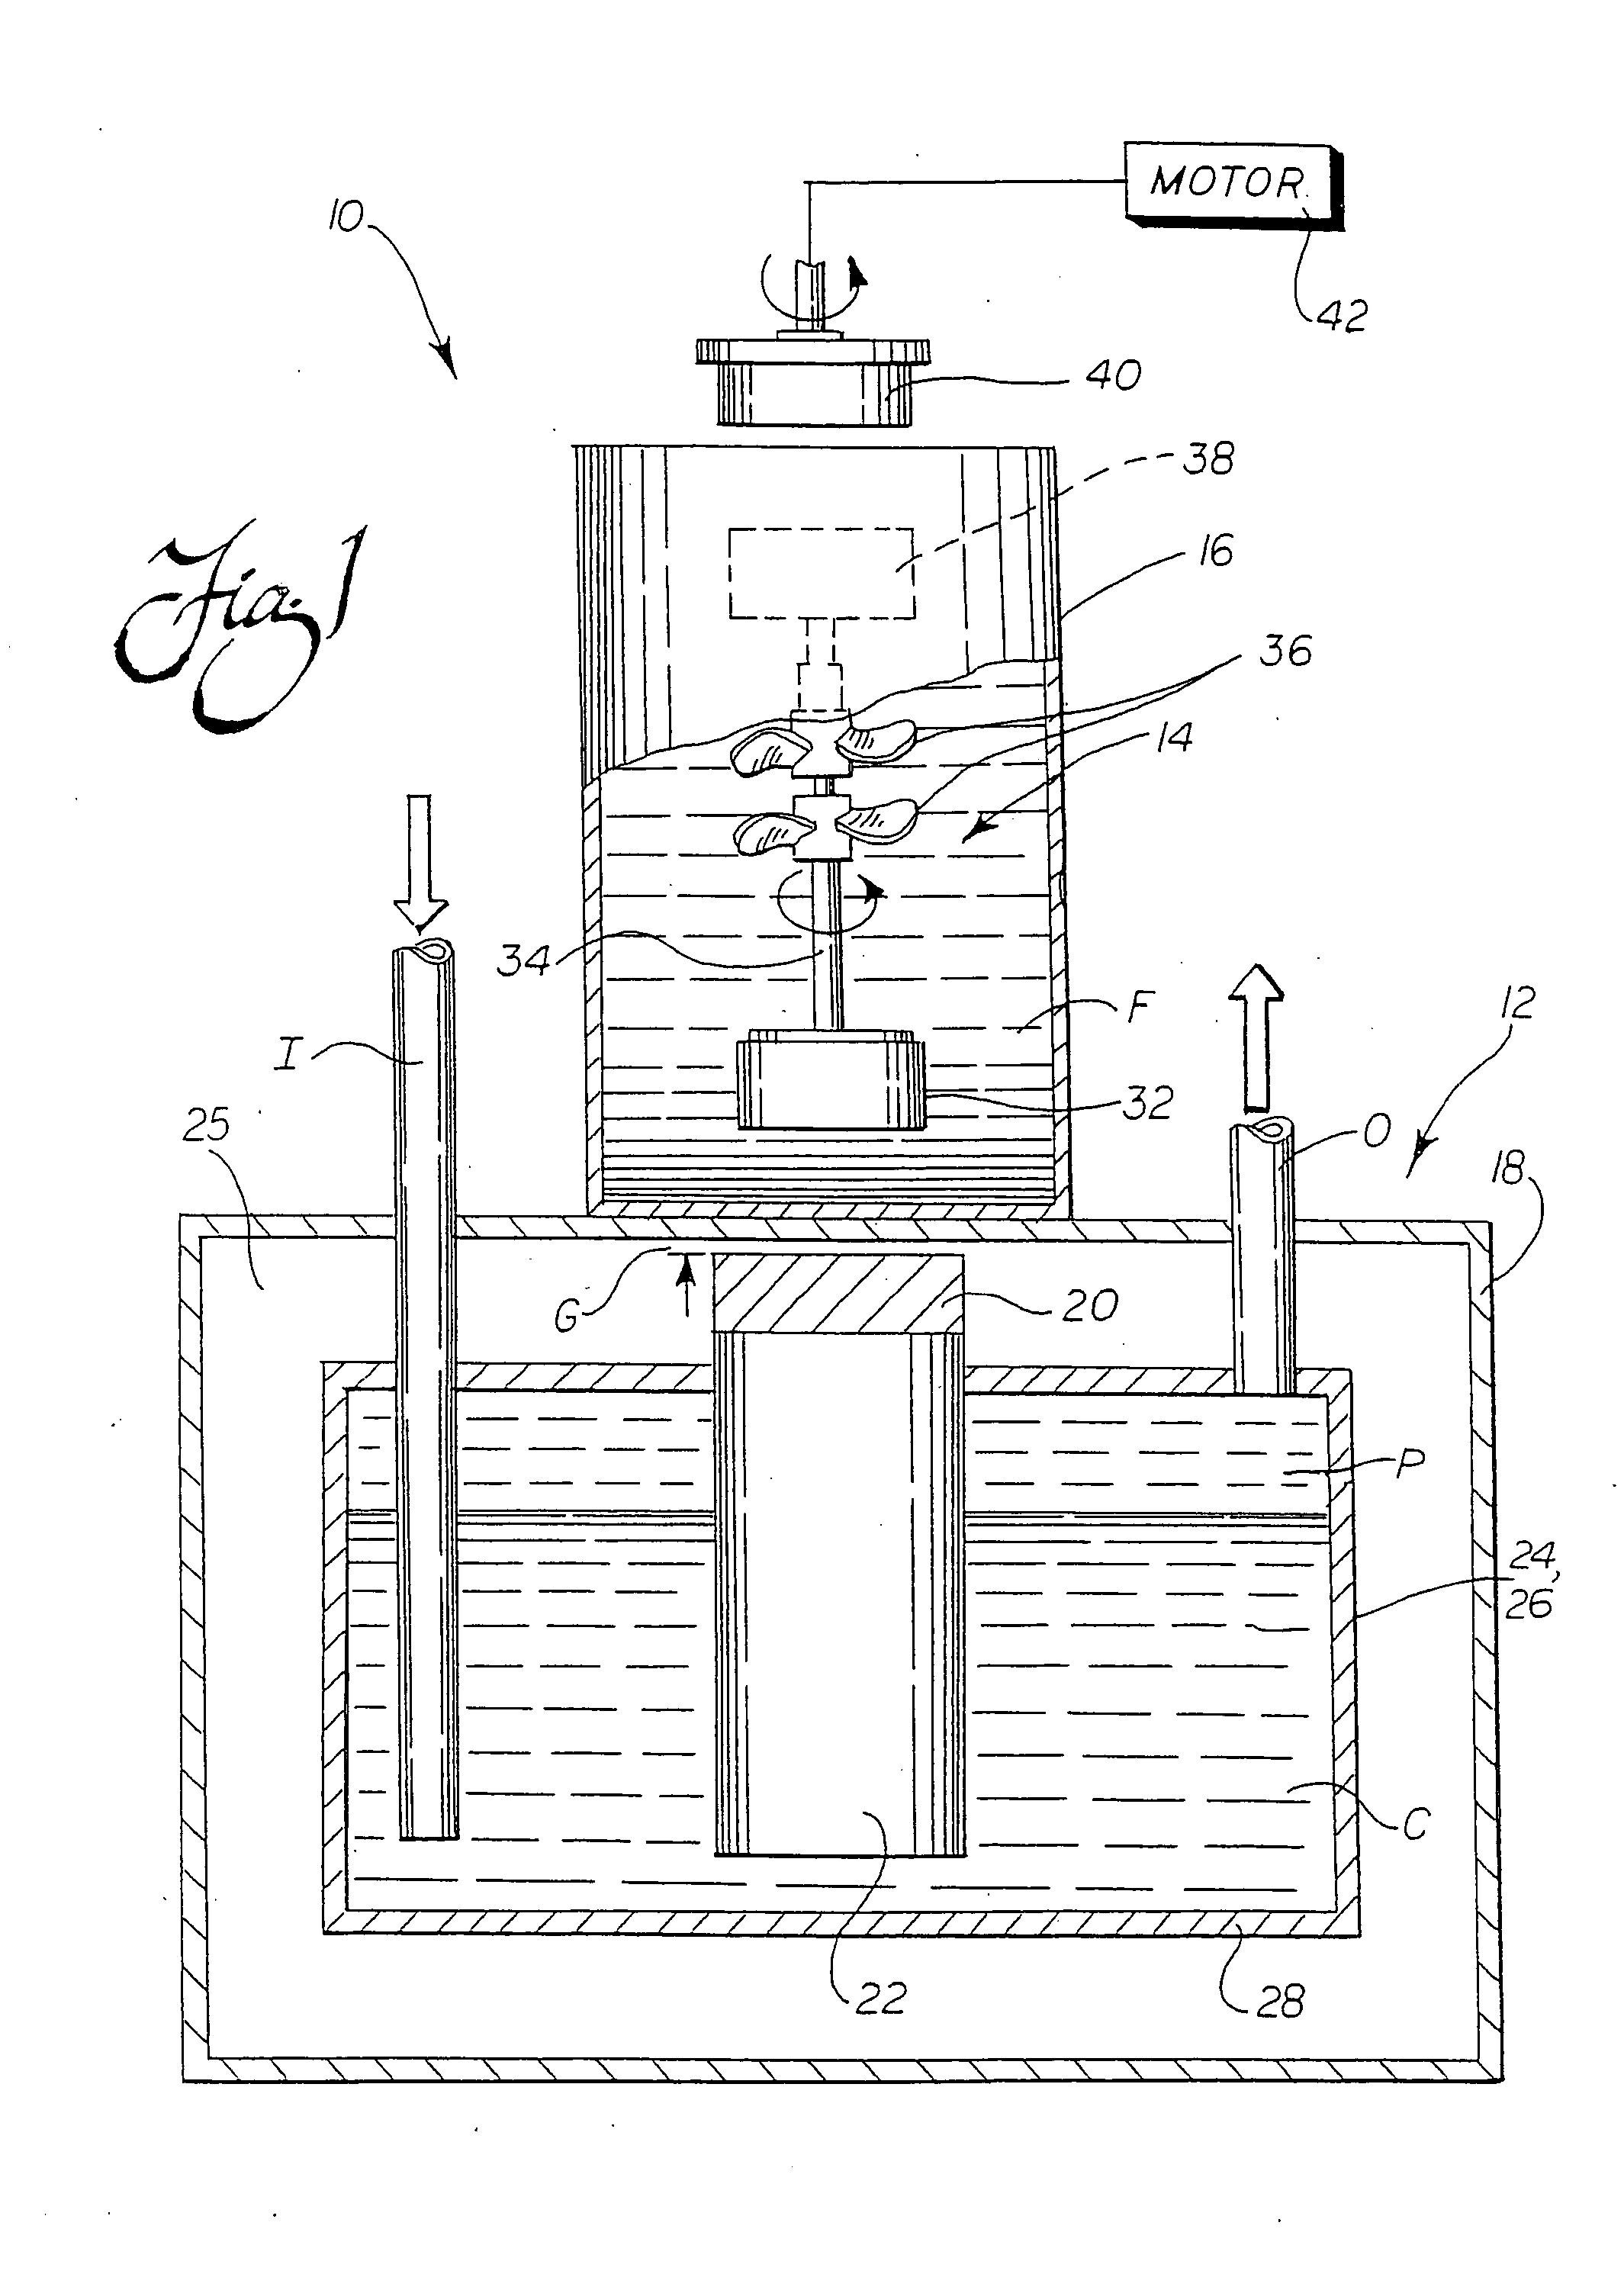 Sterile fluid pumping or mixing system and related method